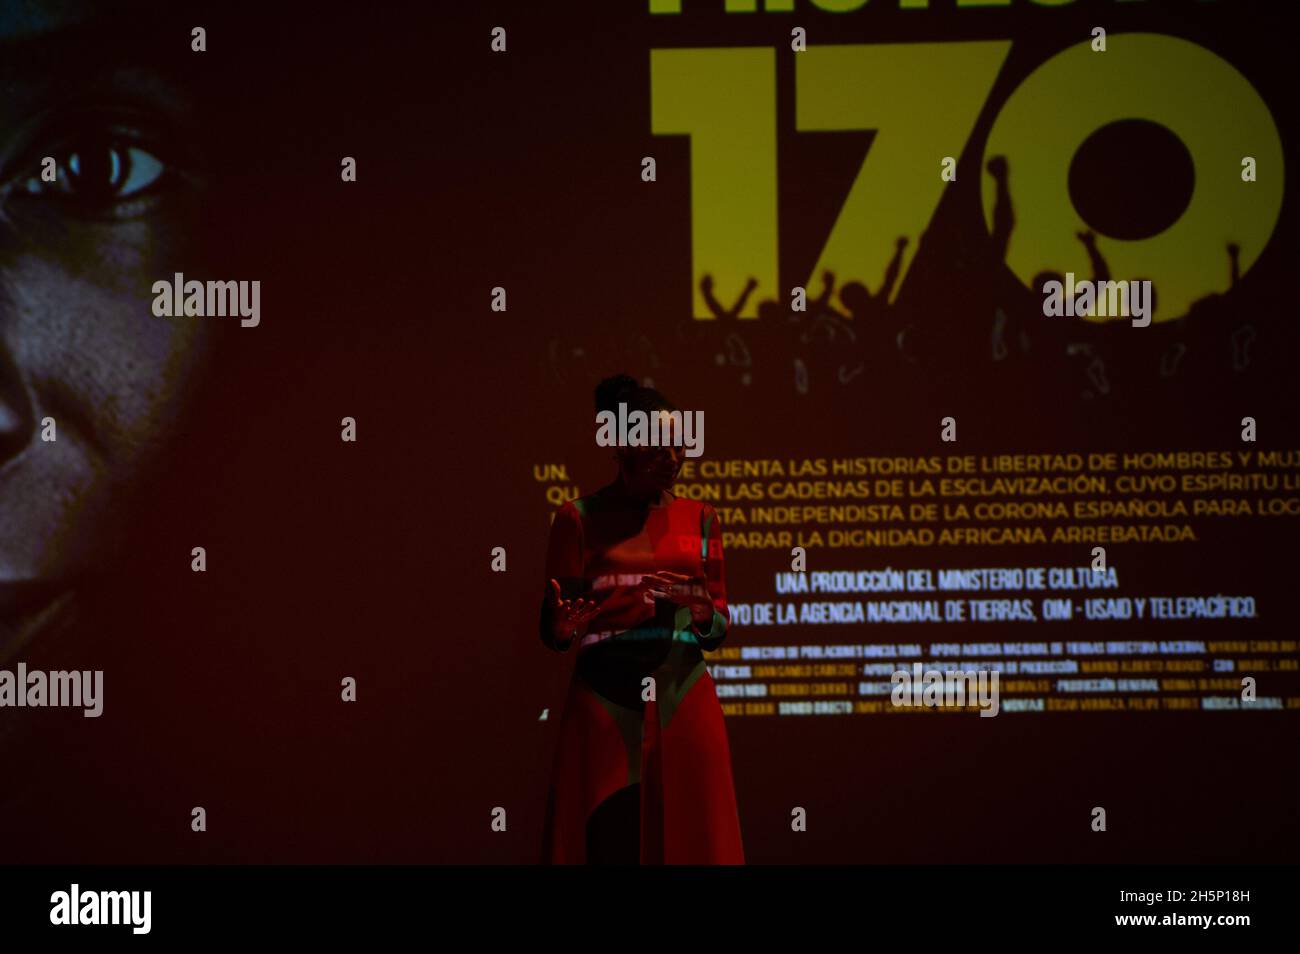 Bogota, Colombia. 10th Nov, 2021. Personalities and politicians take part in the premiere of 'Proyecto 170' a Television series produced by Colombia's Ministry of Culture as a background and memory of the 170 years since the abolition of slavory in Colombia, in the event personalities like Mabelle Lara and the minister of Culture Angelica Maria Mayolo, along representatives of the 'Agencia Nacional de Tierras', USAID and the United Nations OIM. On November 10, 2021, in Bogota, Colombia. Credit: Long Visual Press/Alamy Live News Stock Photo